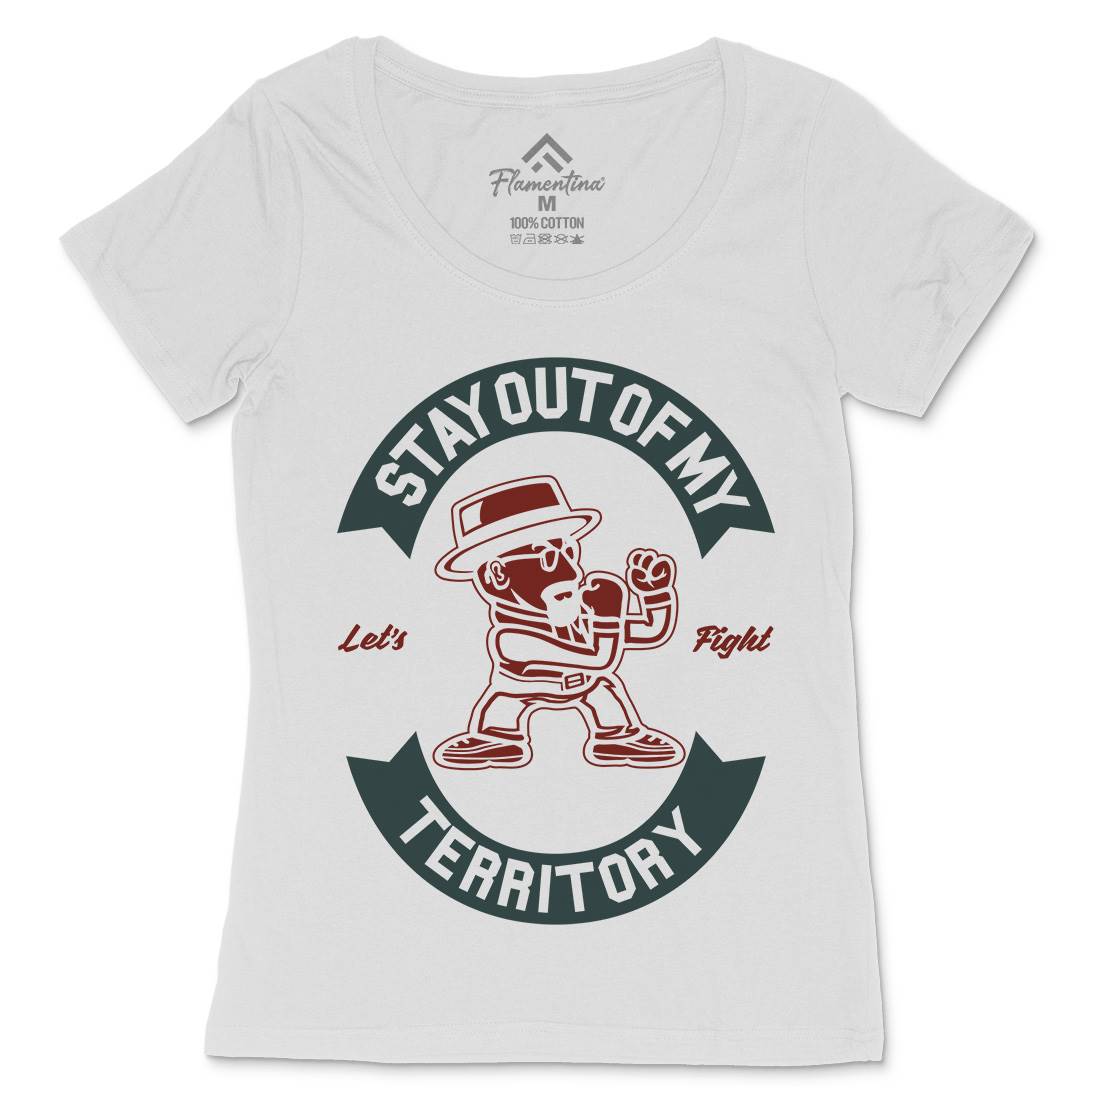 Stay Out Womens Scoop Neck T-Shirt Retro A284